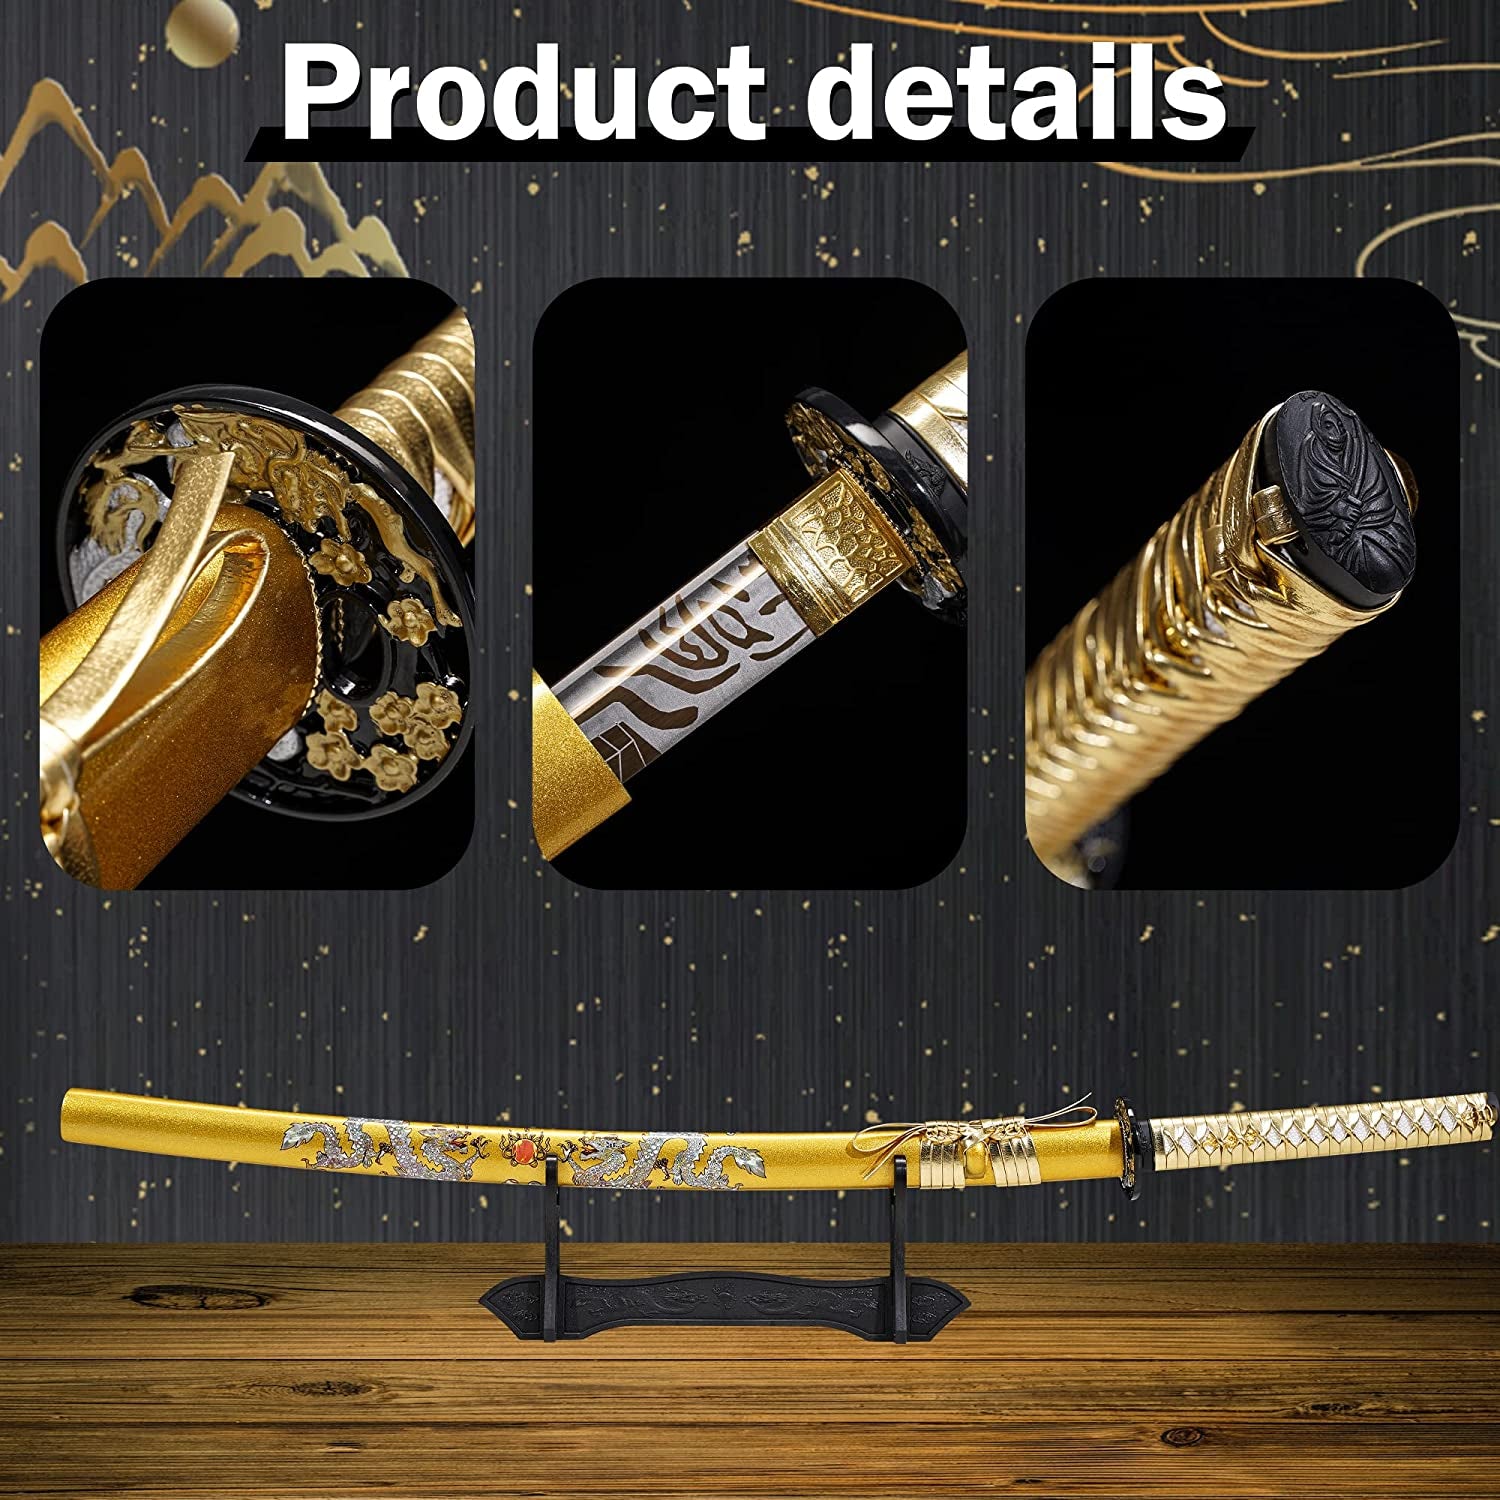 -Samurai Katana Sword Real - Hand Forged 1060 Carbon Steel Blade with Traditional Hardening and Full Tang, for Gift, Cosplay, Collection and Display